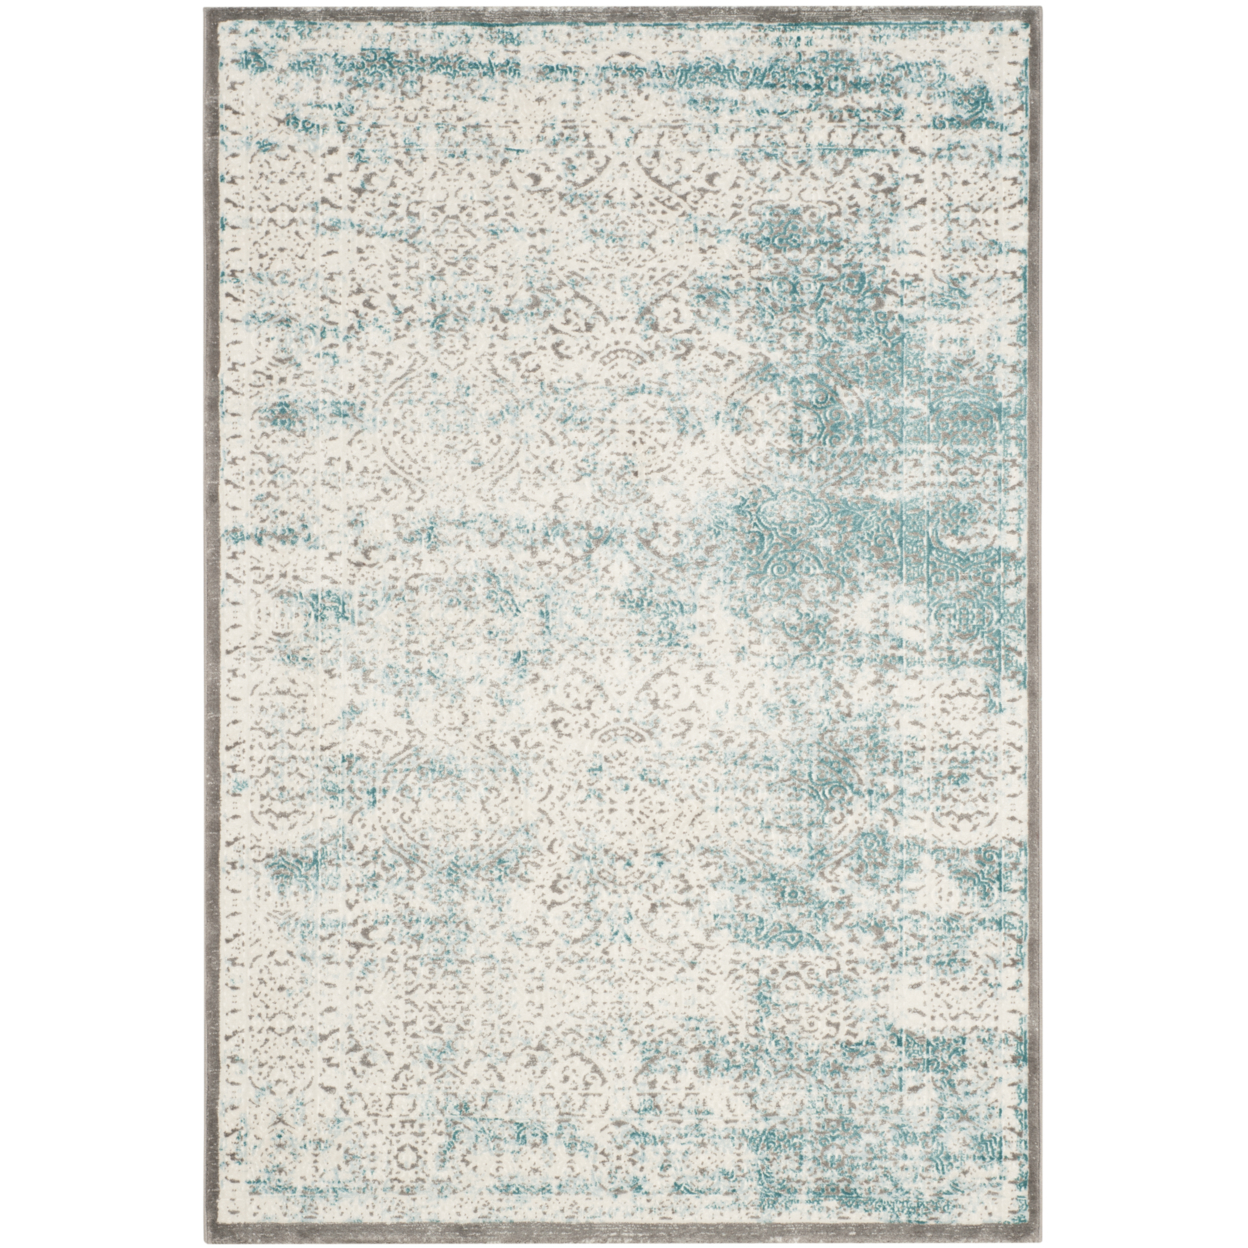 SAFAVIEH Passion Collection PAS401B Turquoise / Ivory Rug - 4' X 5' 7